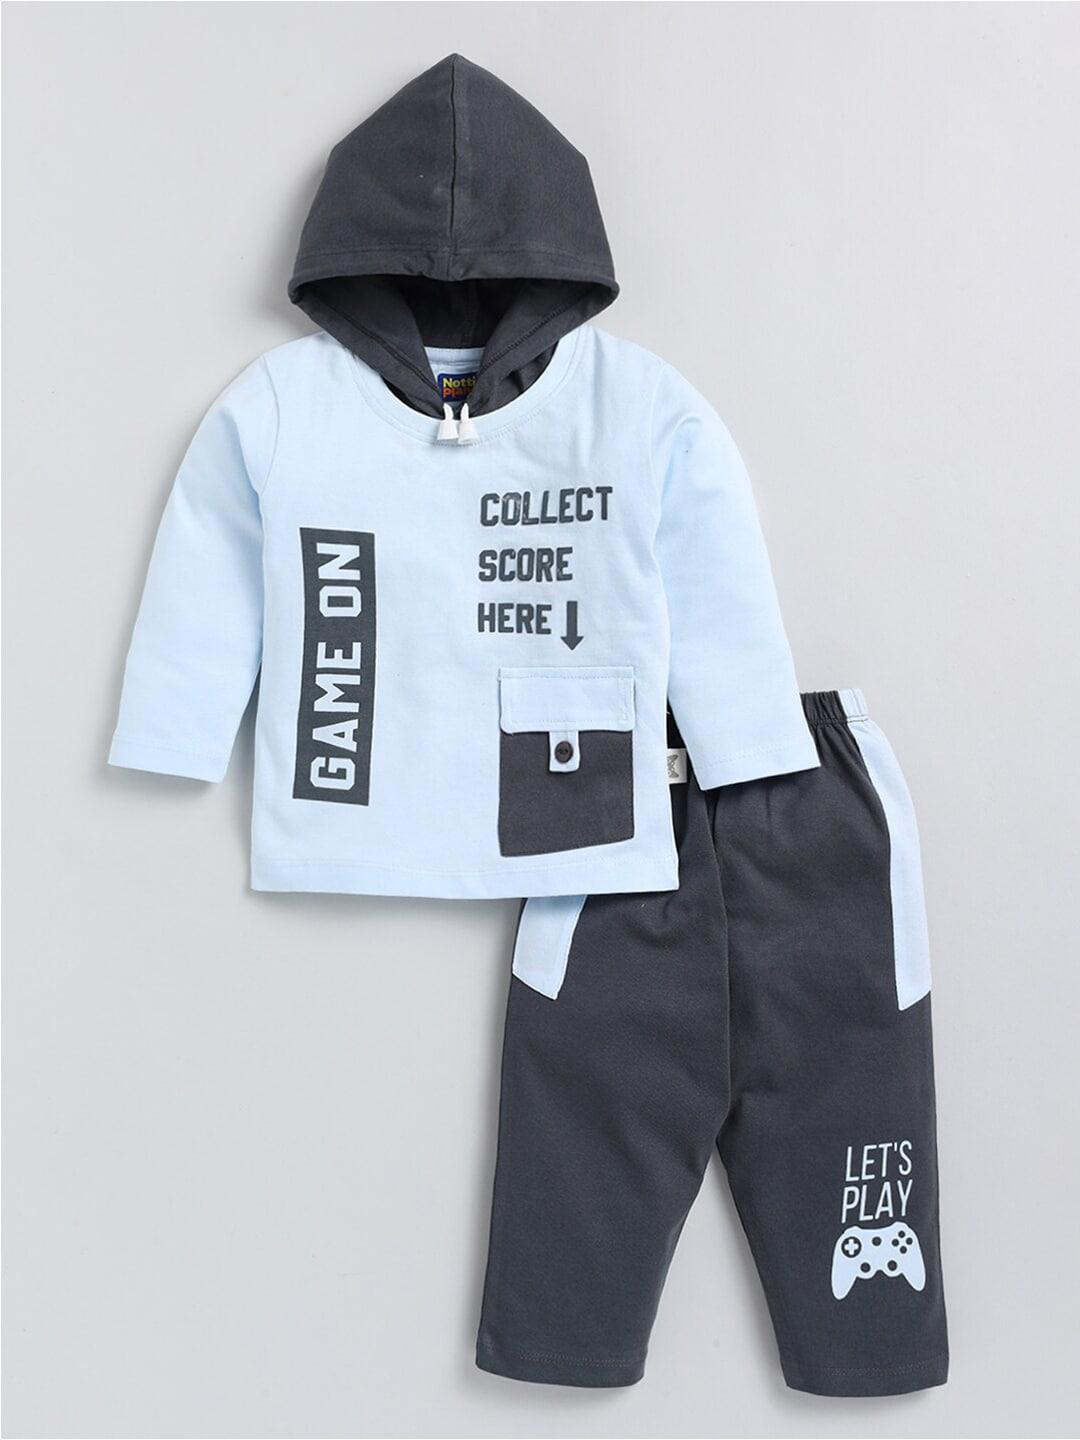 Nottie Planet Boys Typography Printed Hooded Neck Pure Cotton Clothing Set